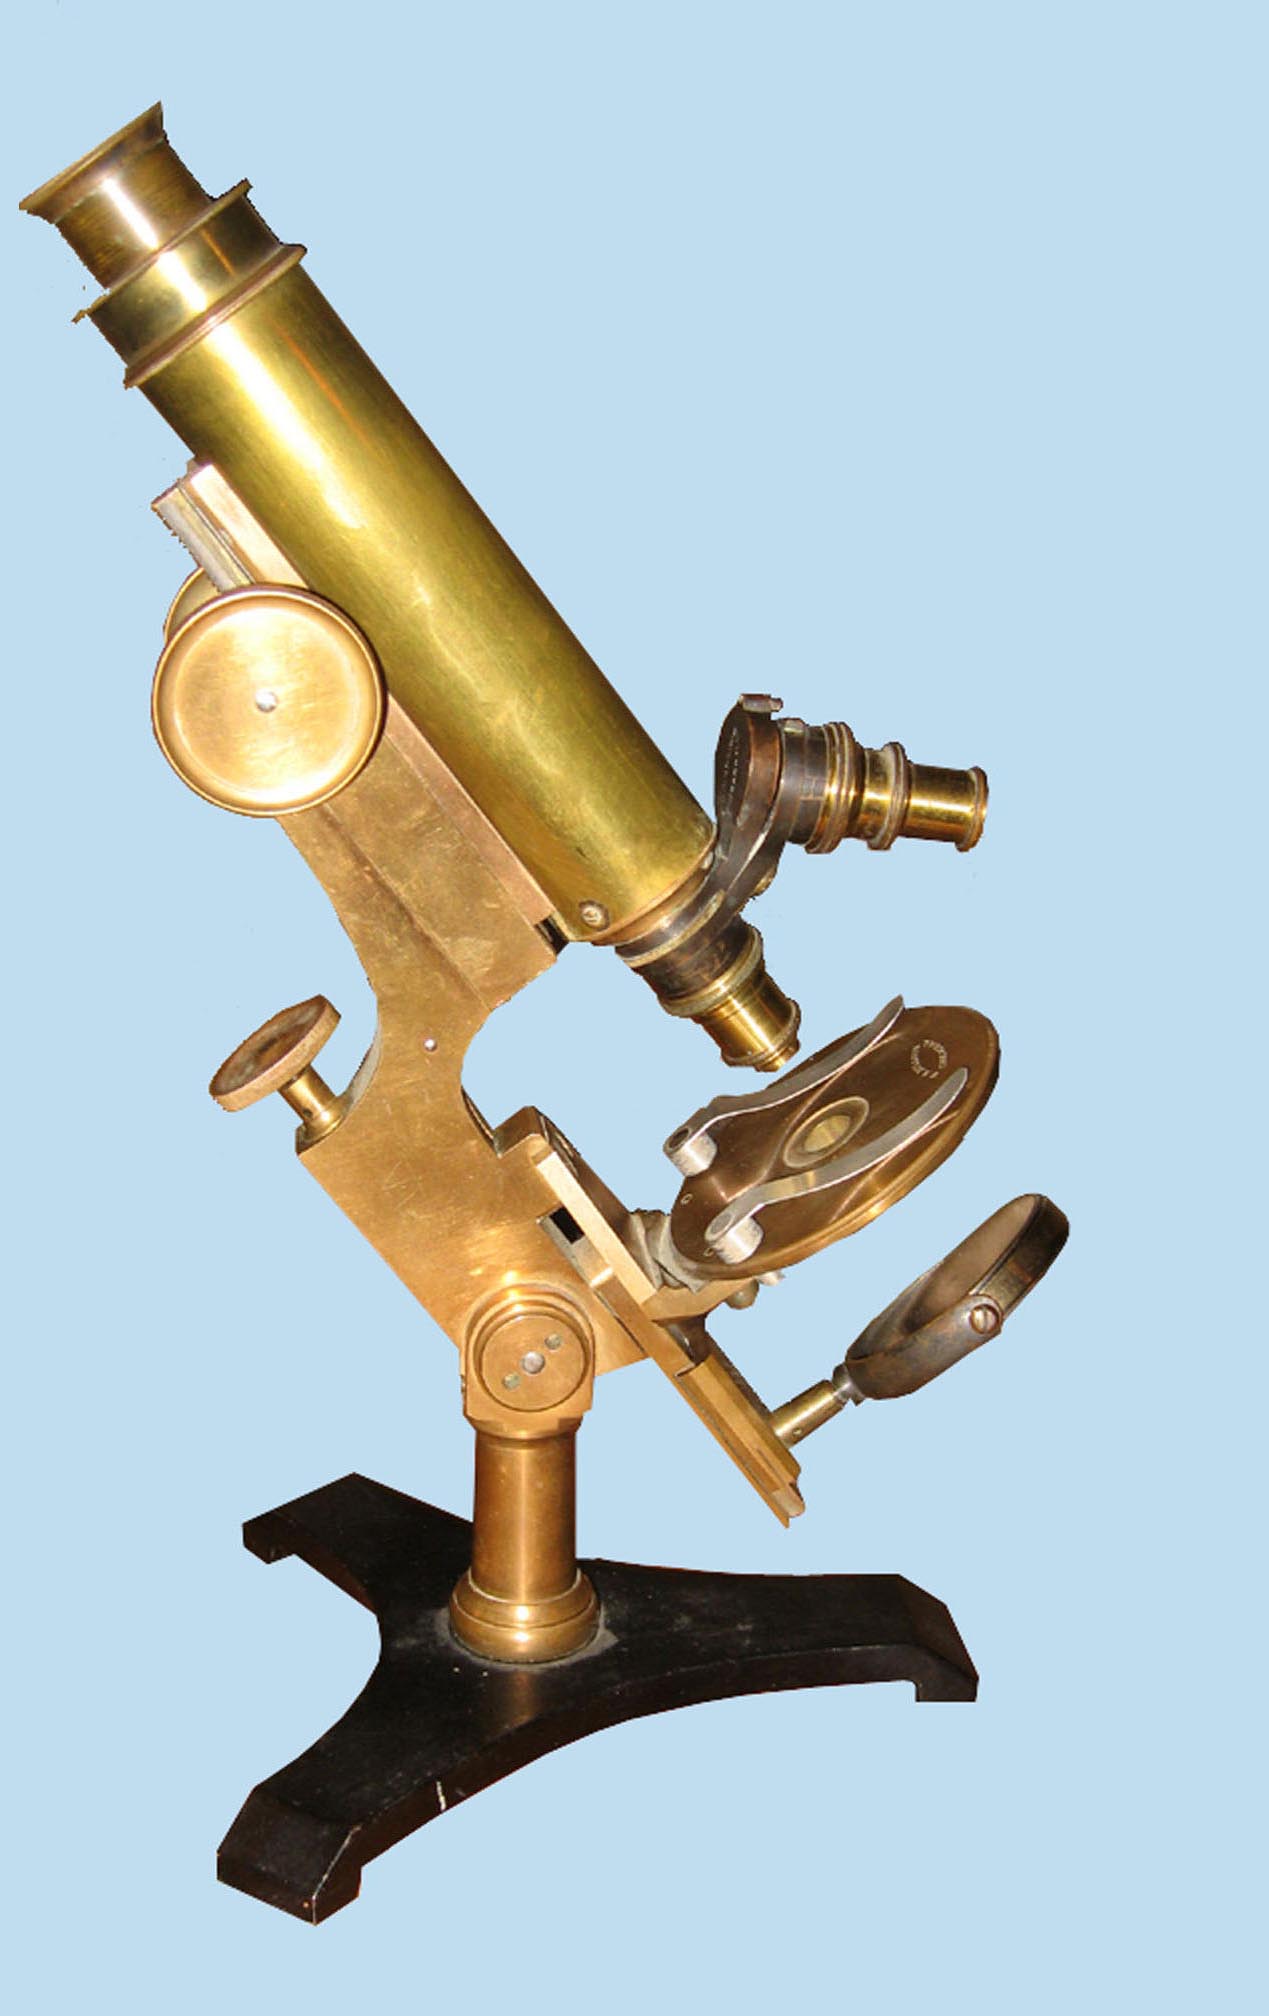 new student microscope later version